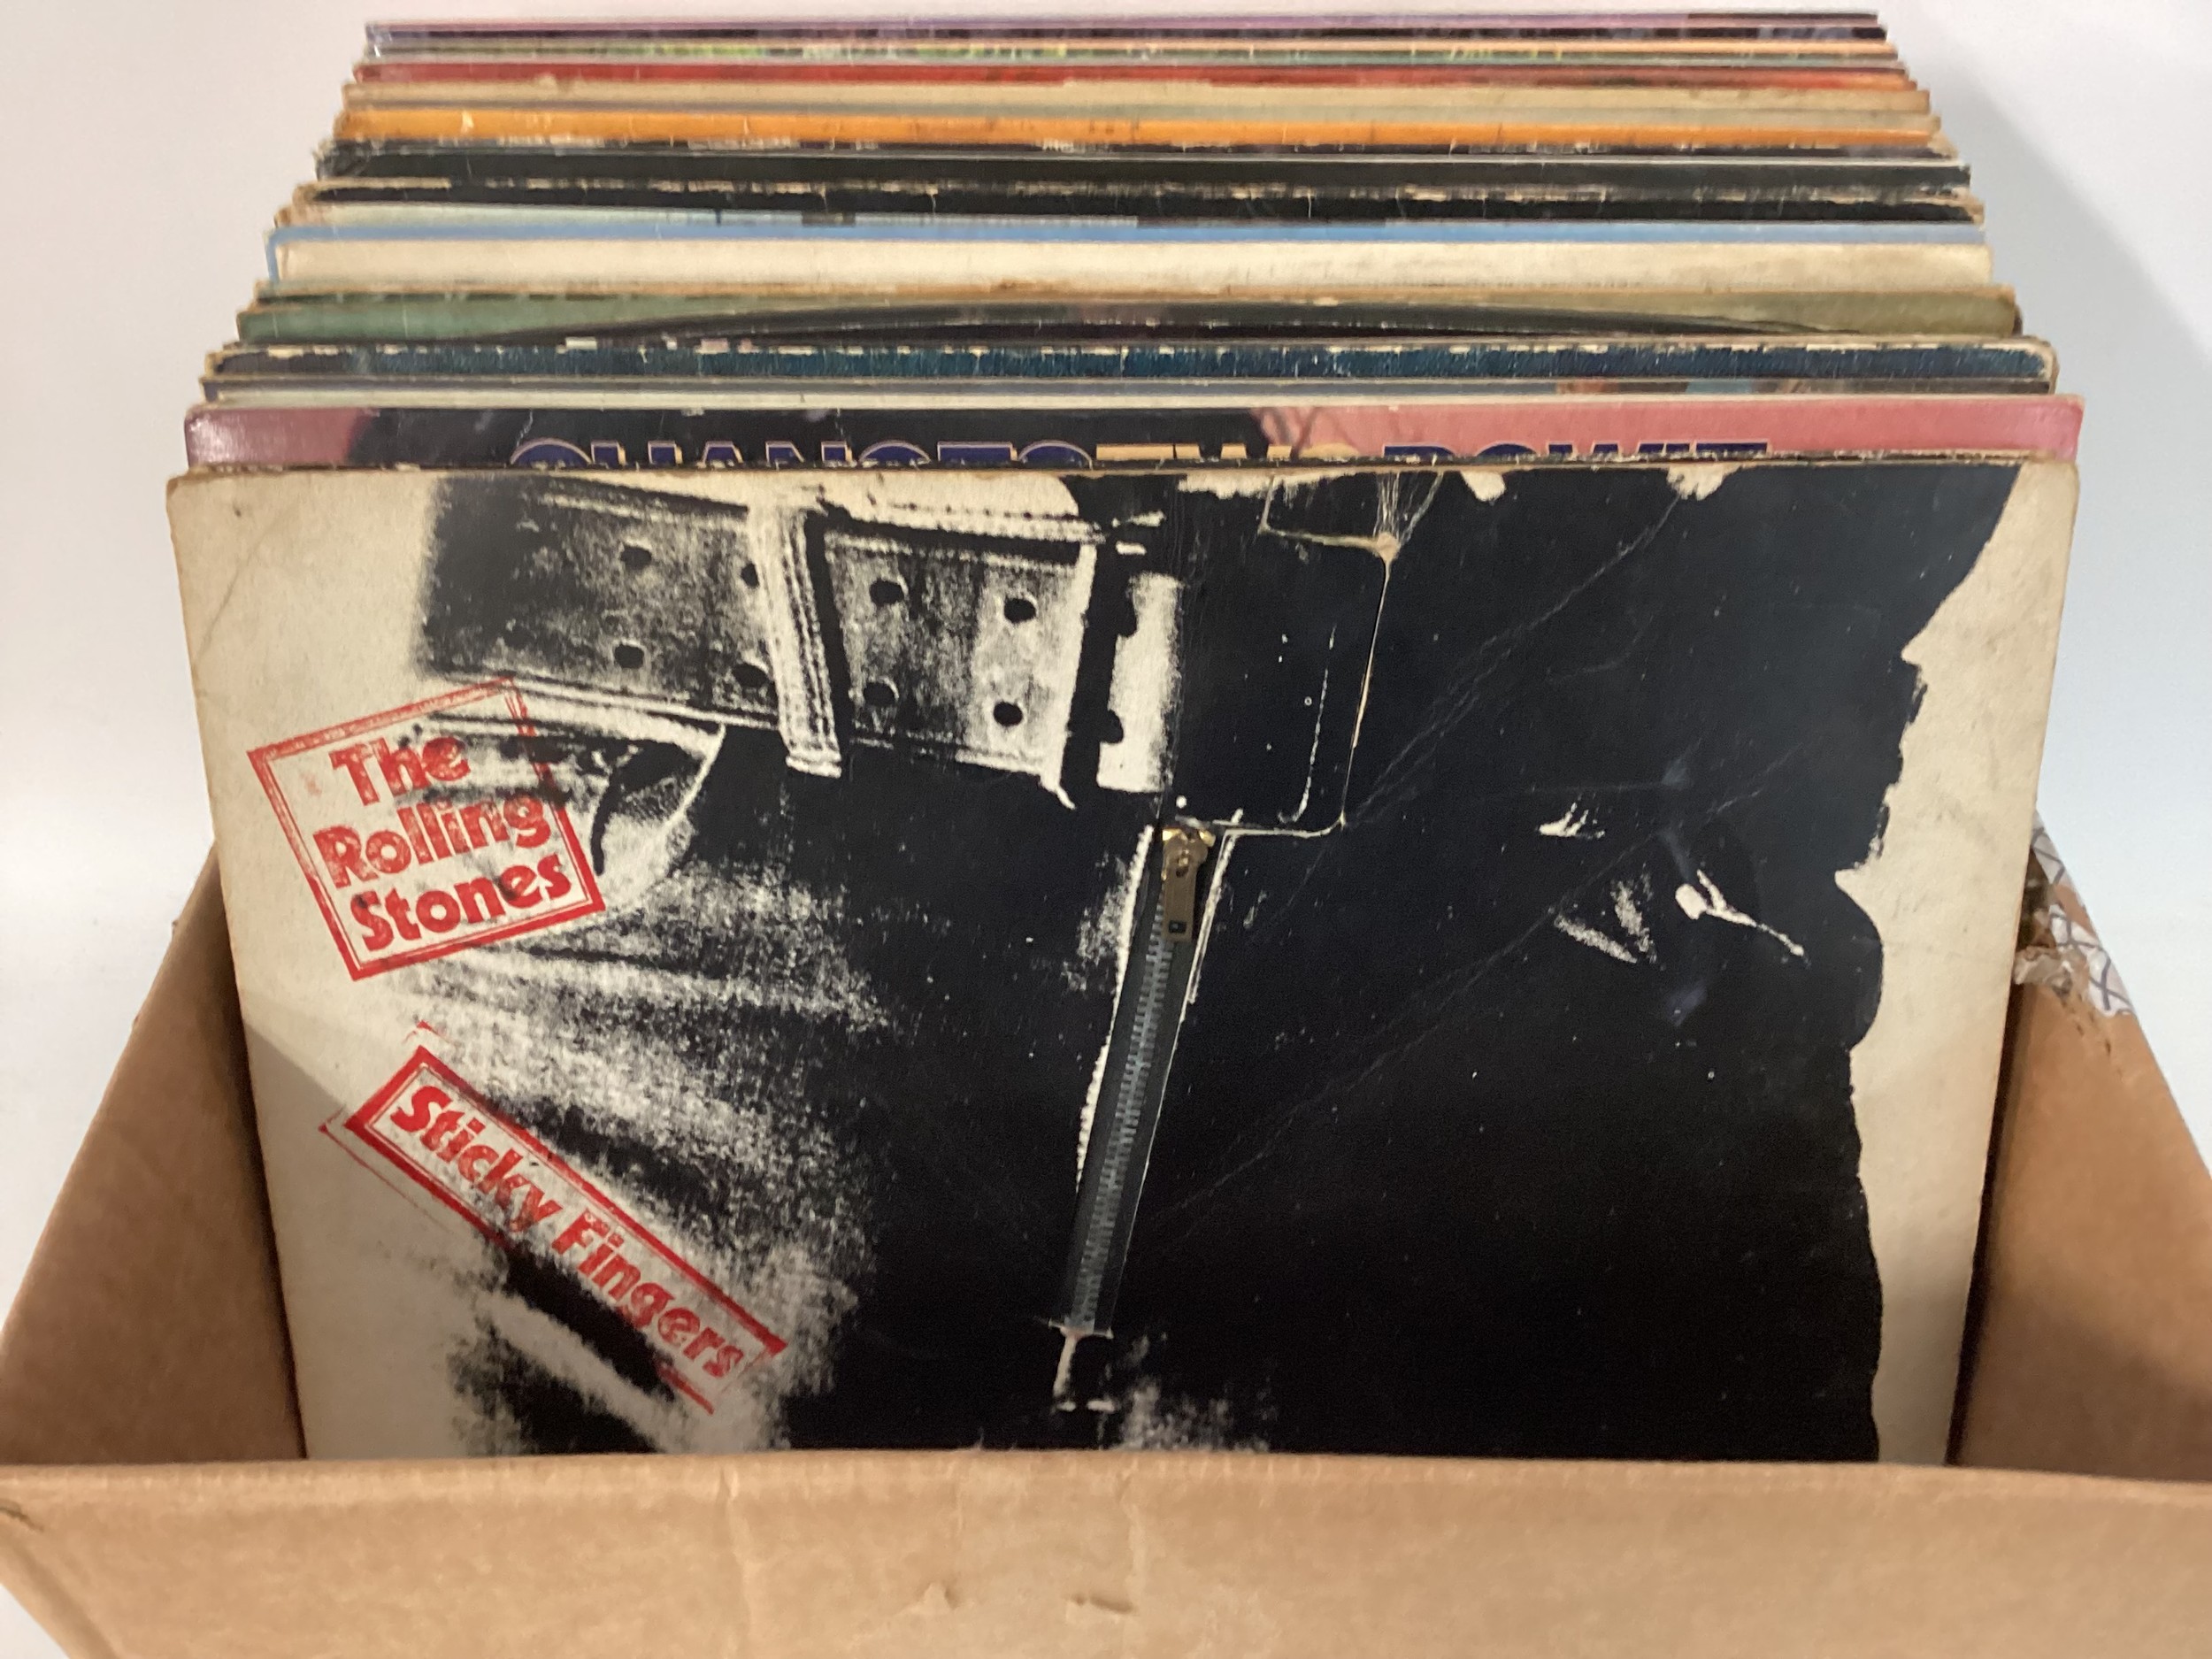 BOX OF VARIOUS ROCK & POP VINYL LP RECORDS. Containing various genres and including artists - Marvin